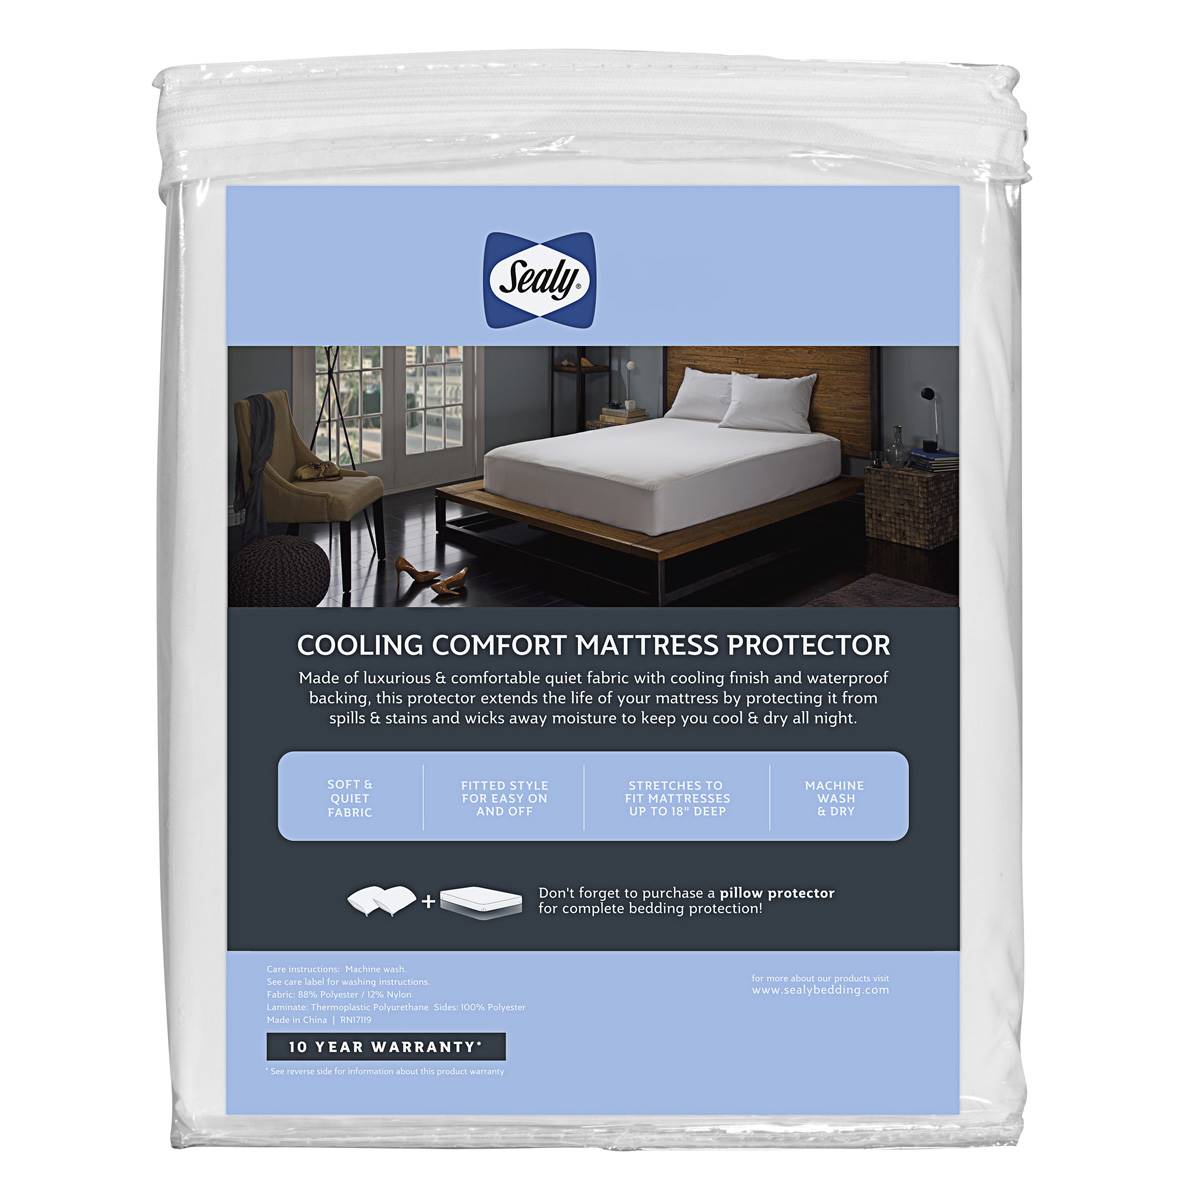 Sealy(R) Cool Comfort Mattress Protector